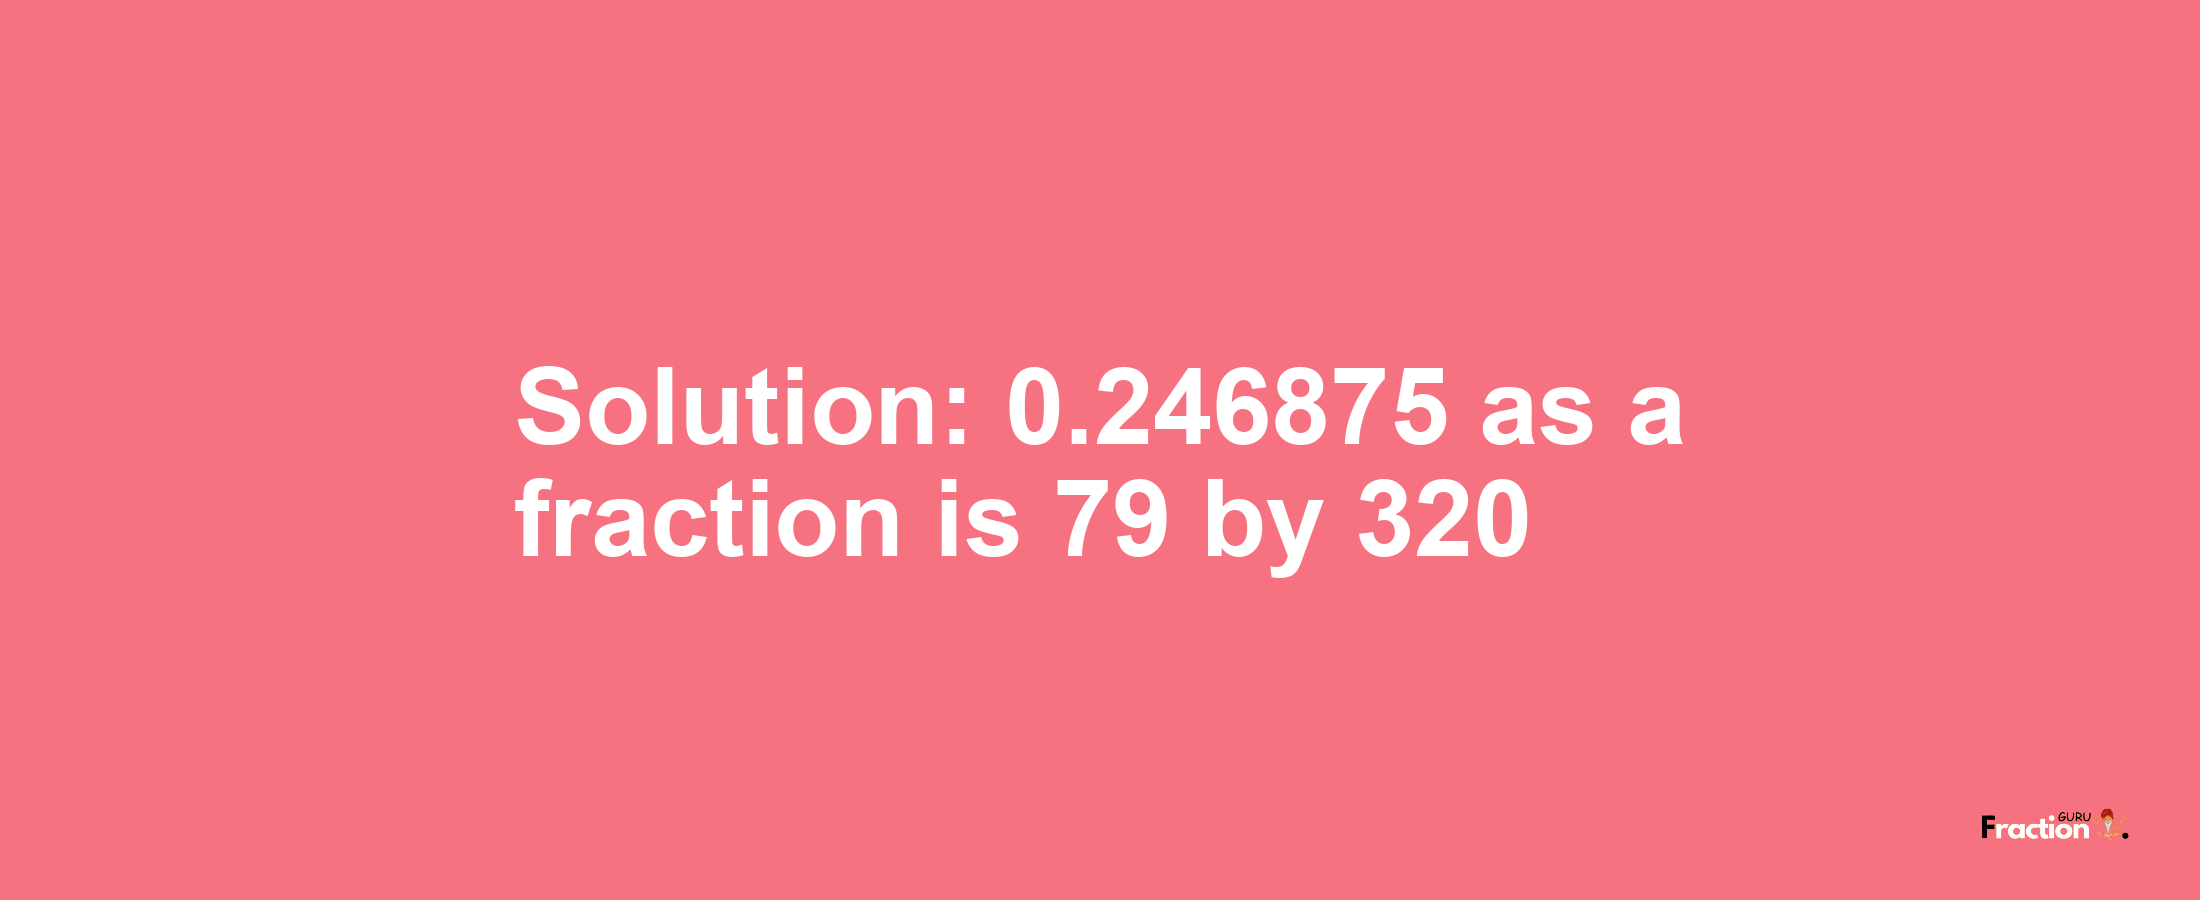 Solution:0.246875 as a fraction is 79/320